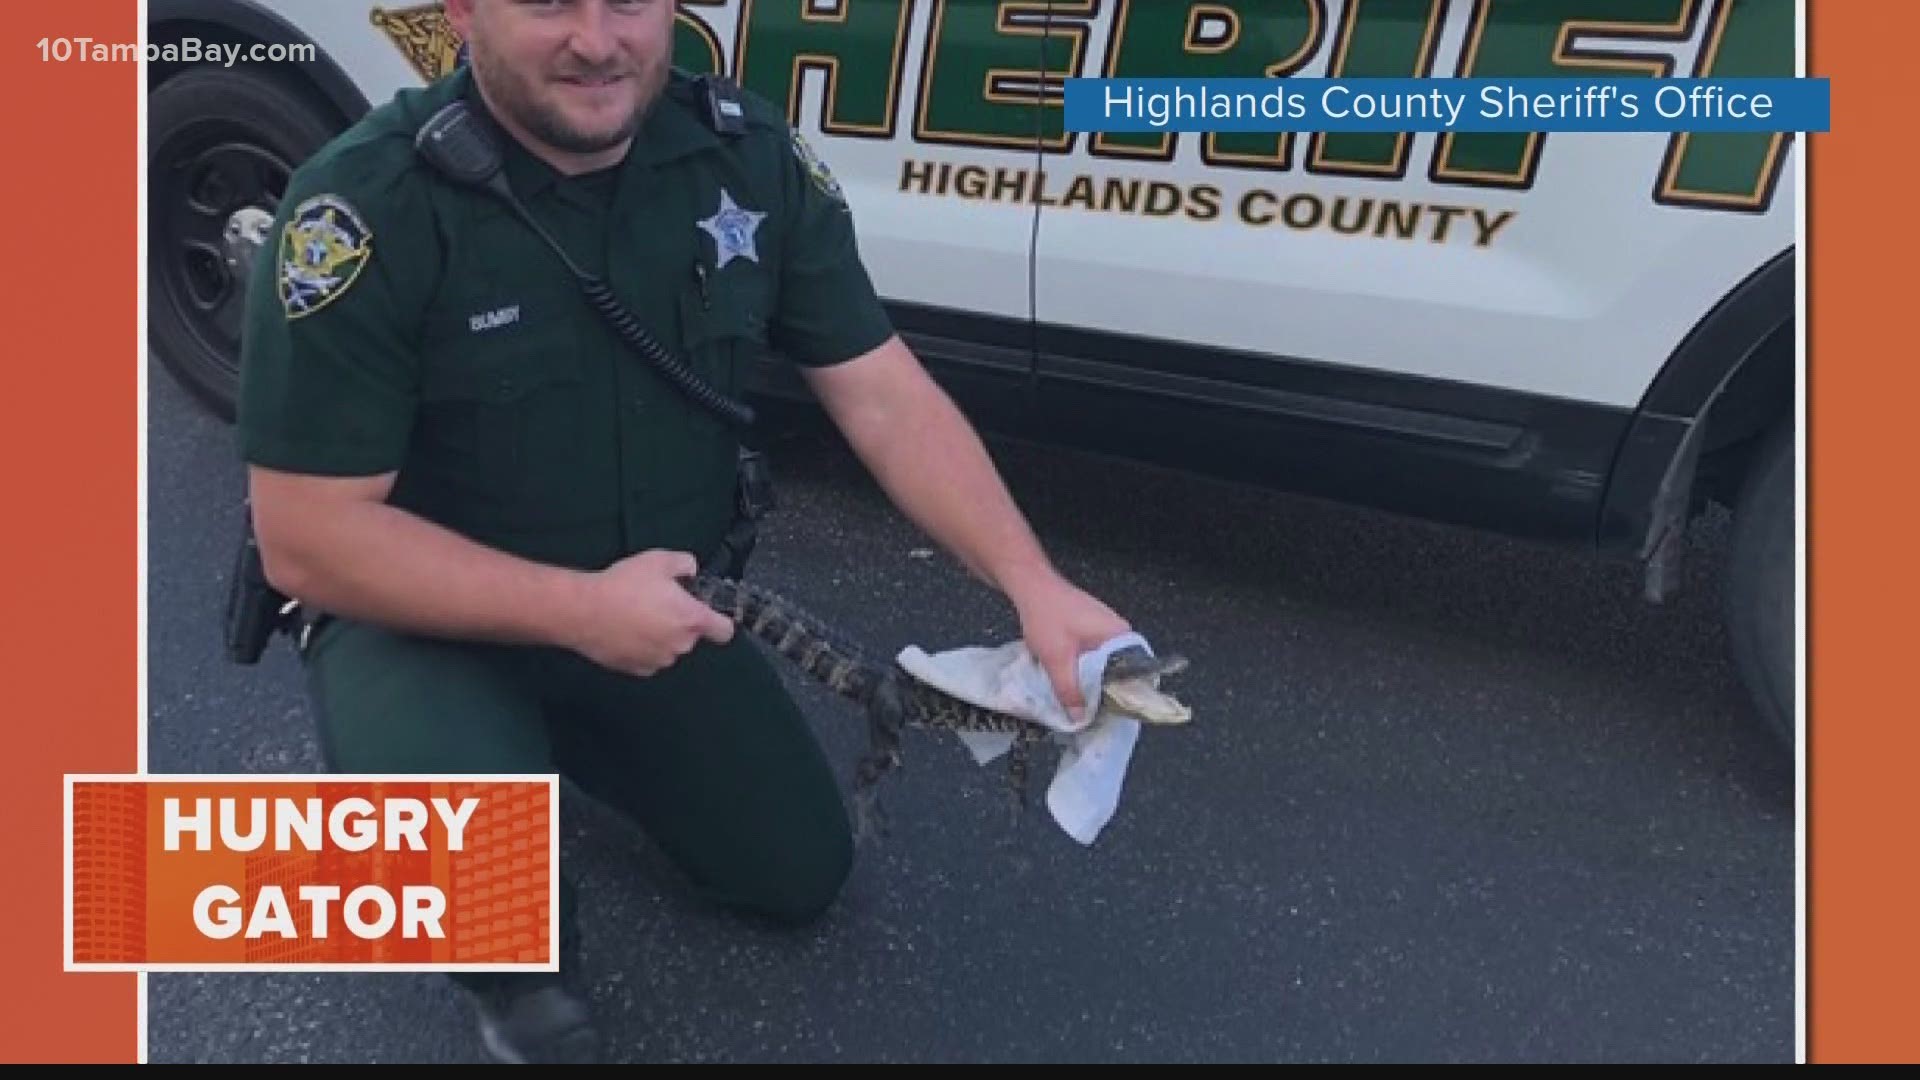 "Even gators are looking for a good meal today," the Highlands County Sheriff's Office wrote Thanksgiving Day.